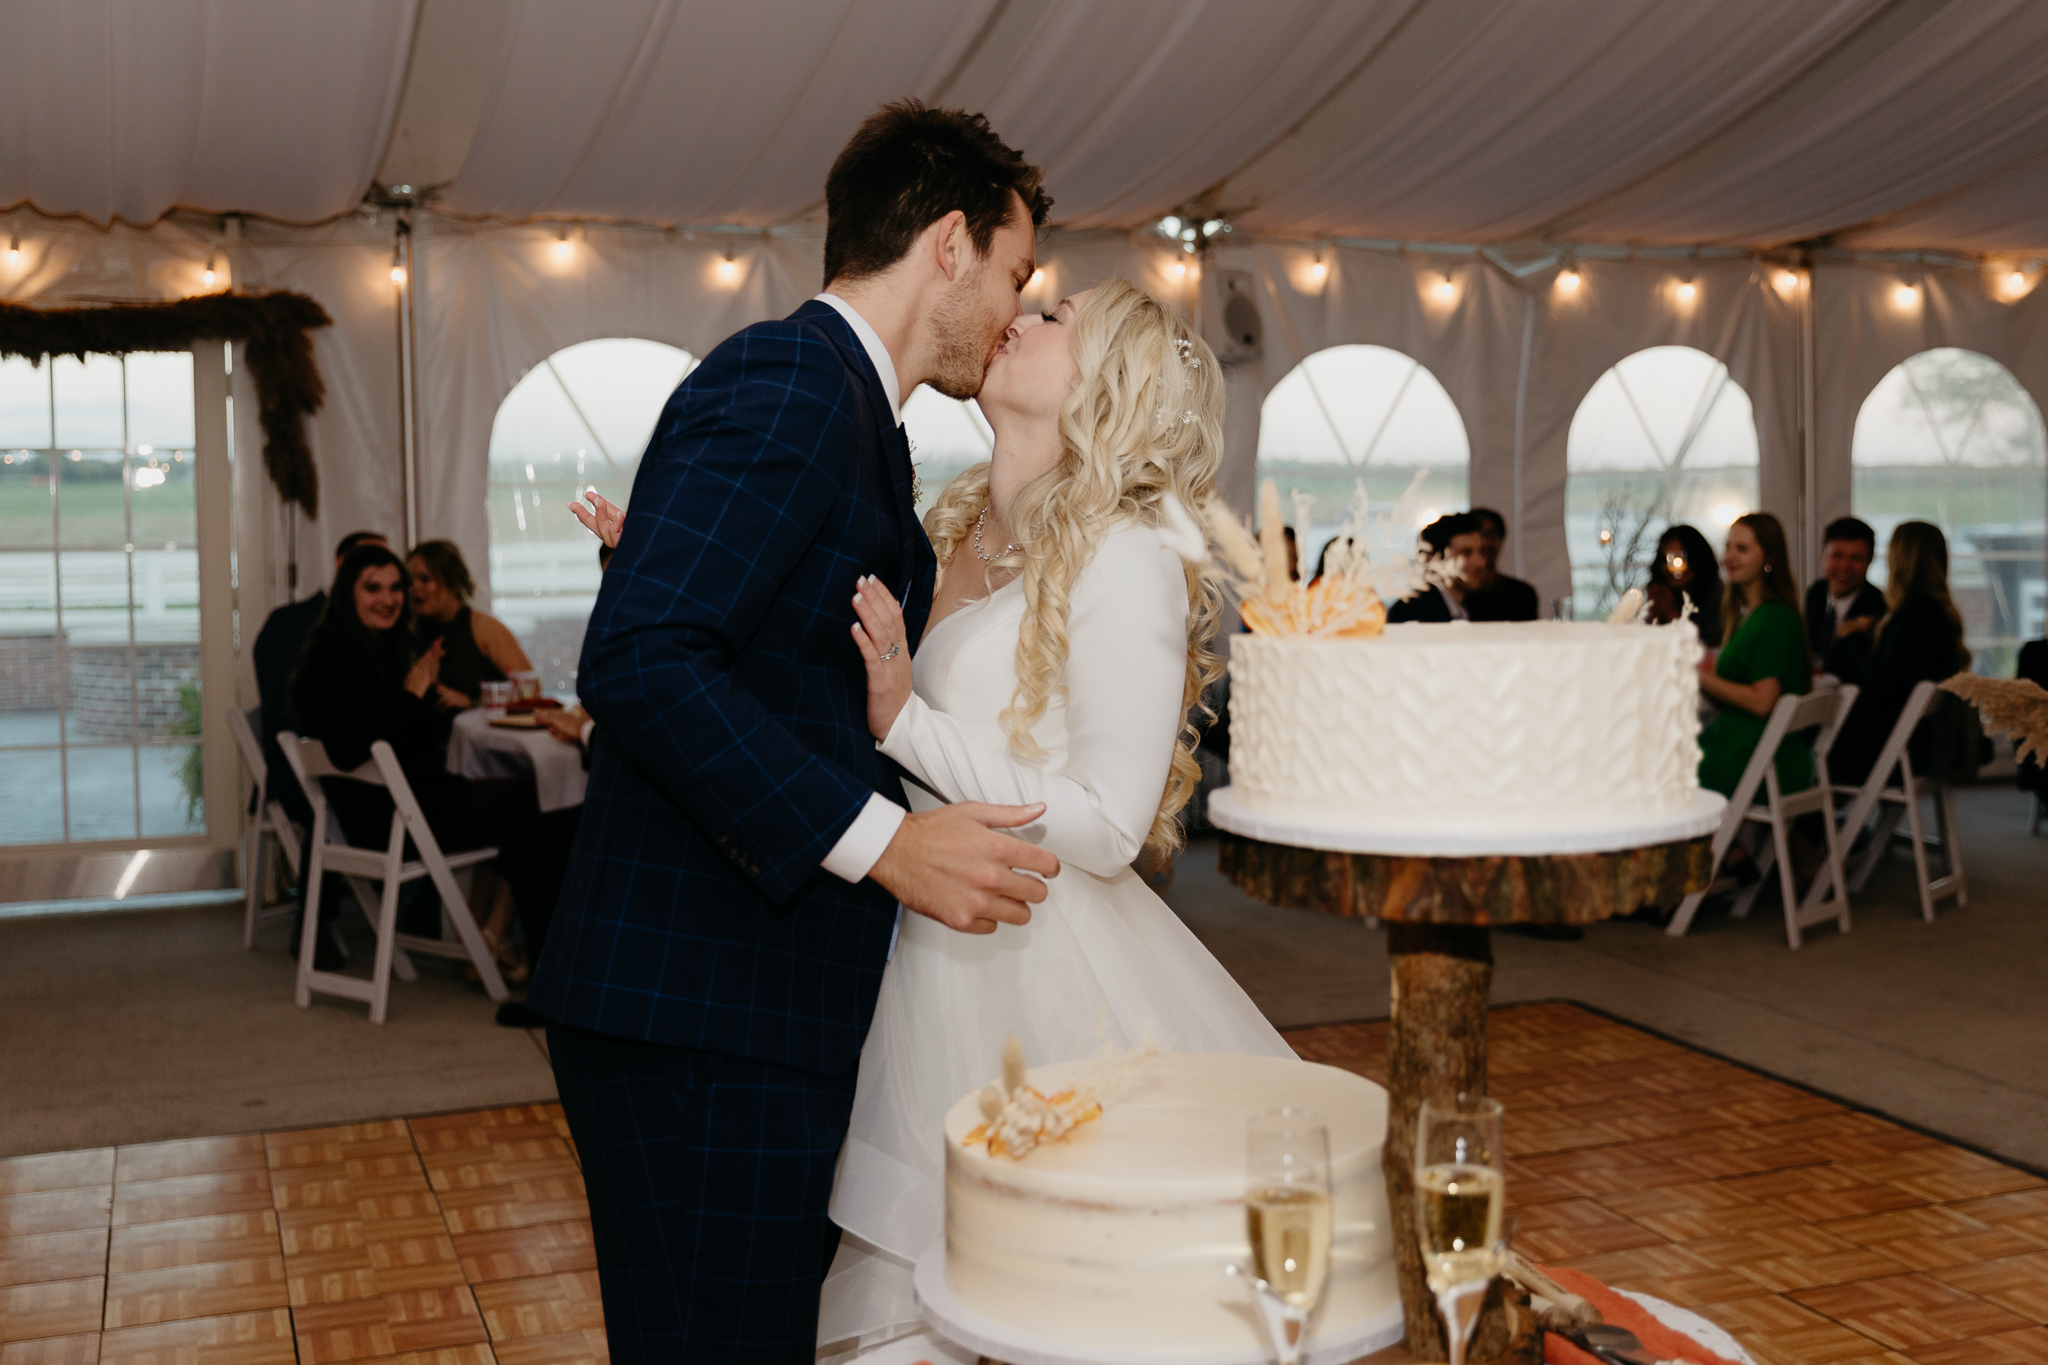 Bride and groom cut cake together in a white tent during their October wedding reception